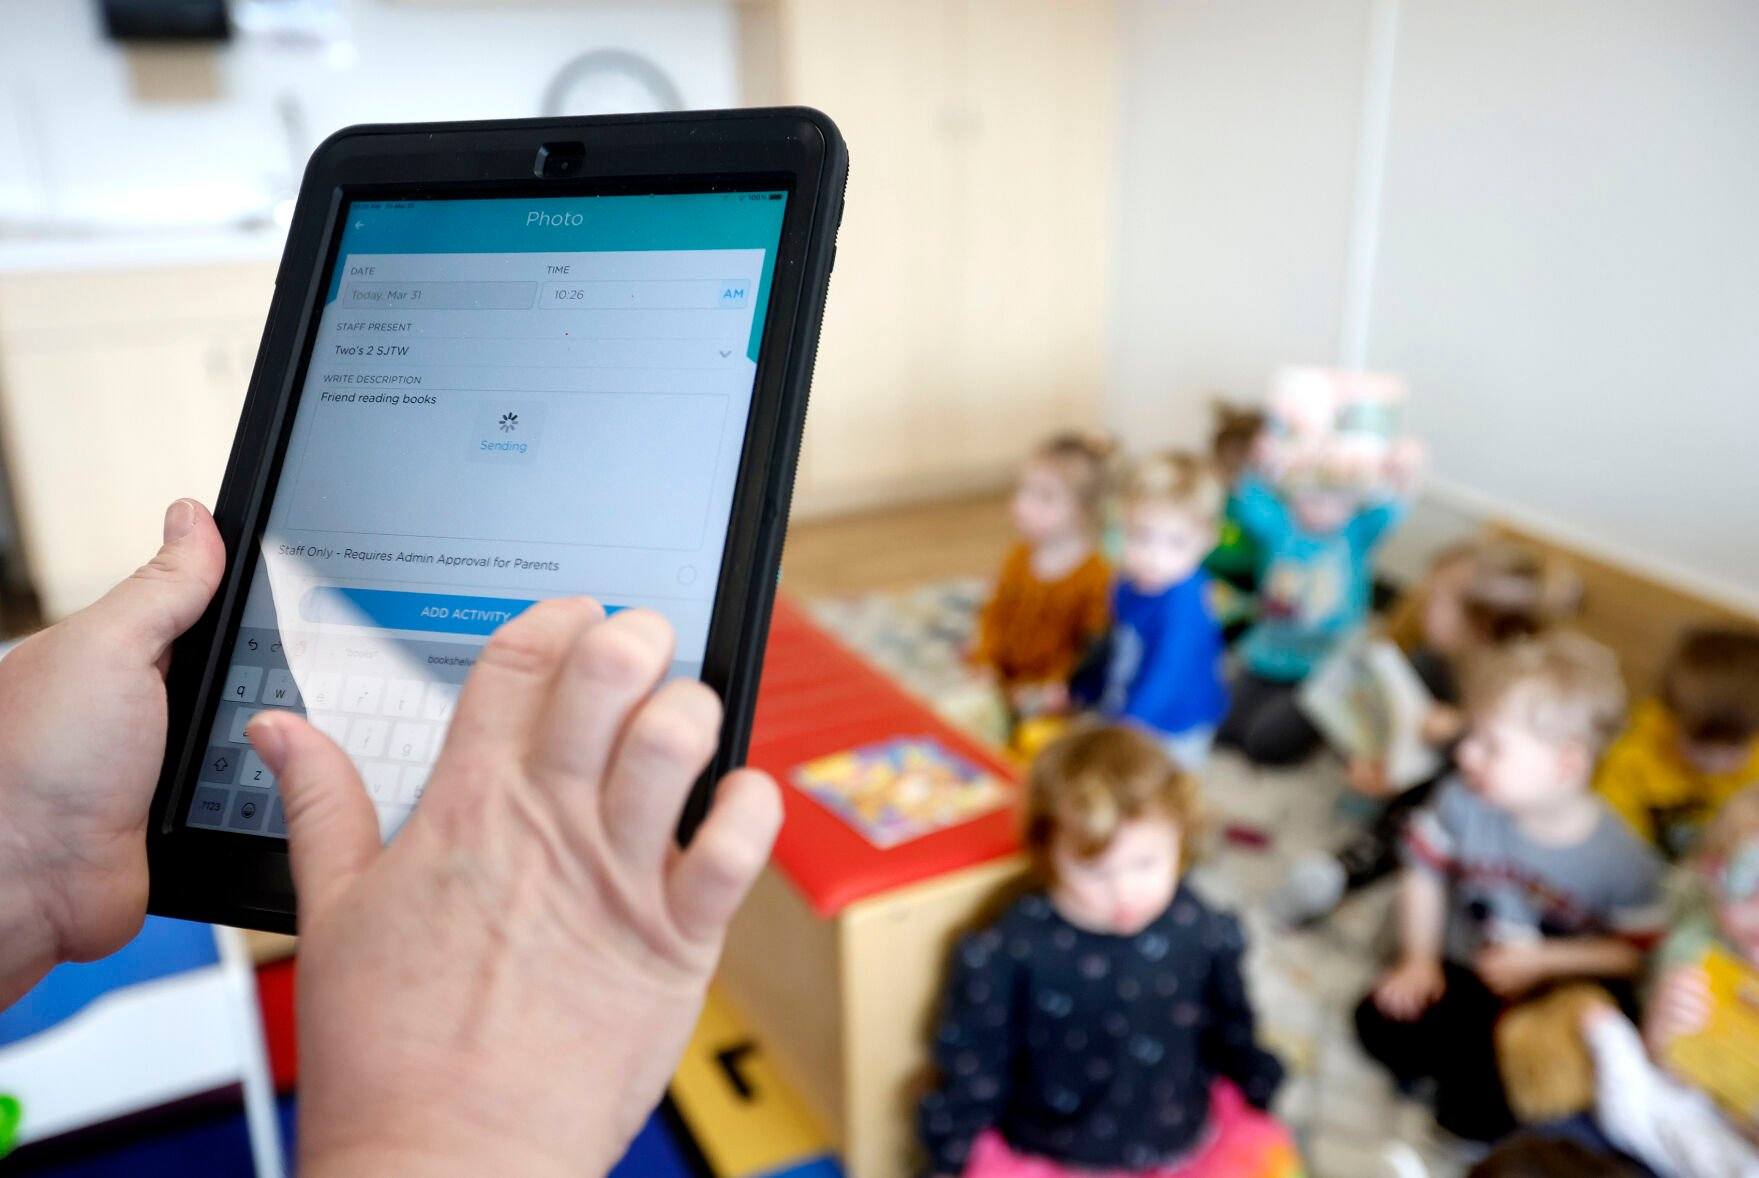 Pauline Brimeyer, a lead teacher, sends an update for her 2-year-olds’ class using the Procare app at St. Joseph the Worker Early Childhood Center.    PHOTO CREDIT: JESSICA REILLY
Telegraph Herald